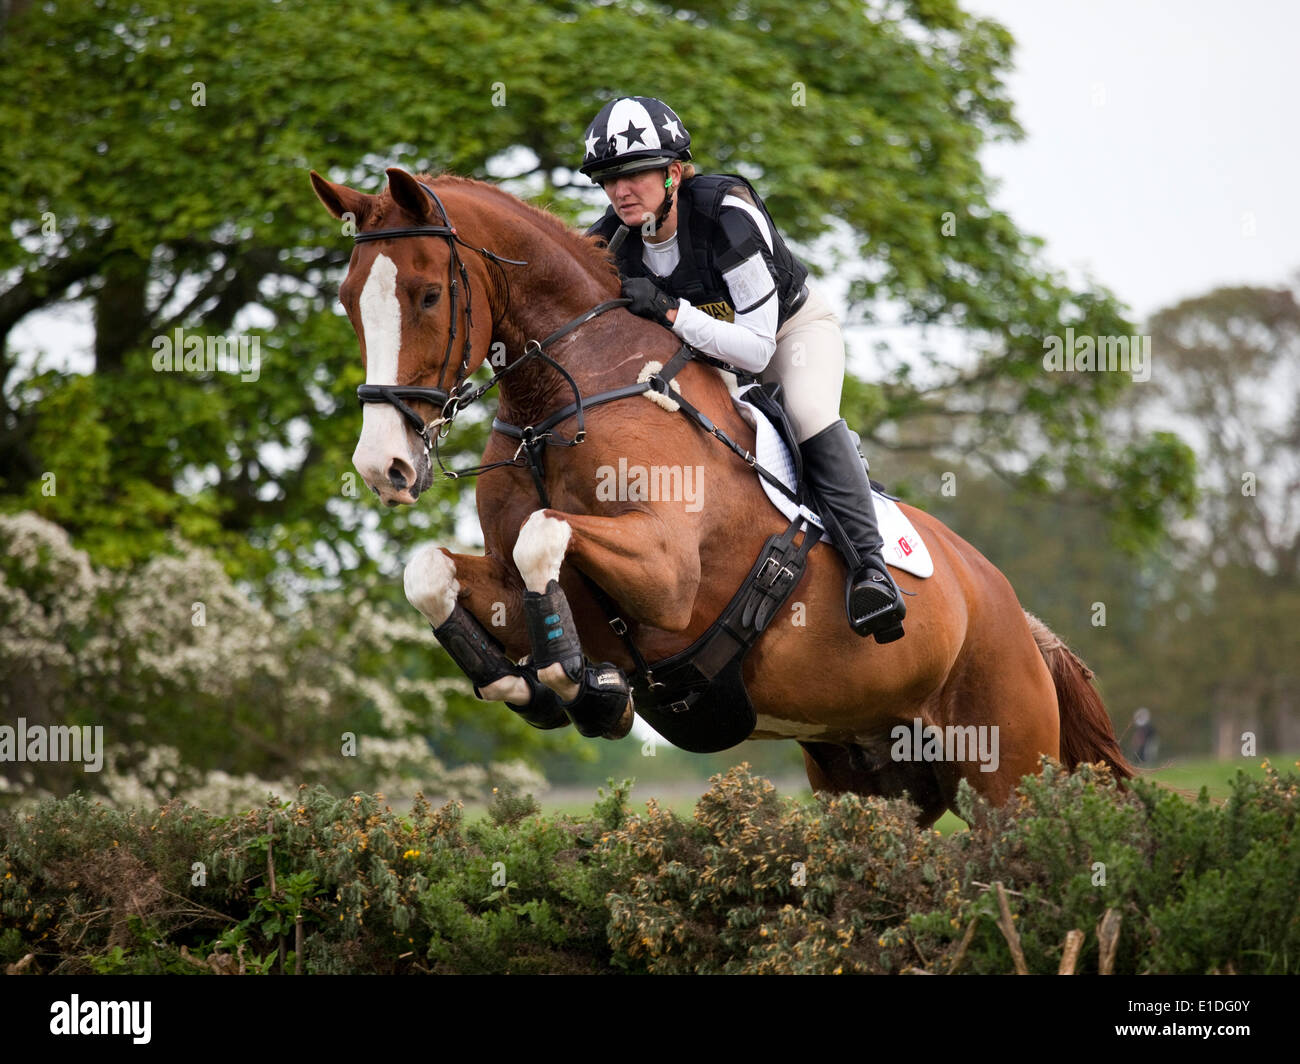 Belsay, England - May 31, 2014: A competitor in the cross country section clears a jump at the 2014 Belsay Horse Trials, held for the second year running in the grounds of Belsay Castle in Northumberland, England. Belsay Castle is managed by English Heritage and is open to the public all year. Stock Photo